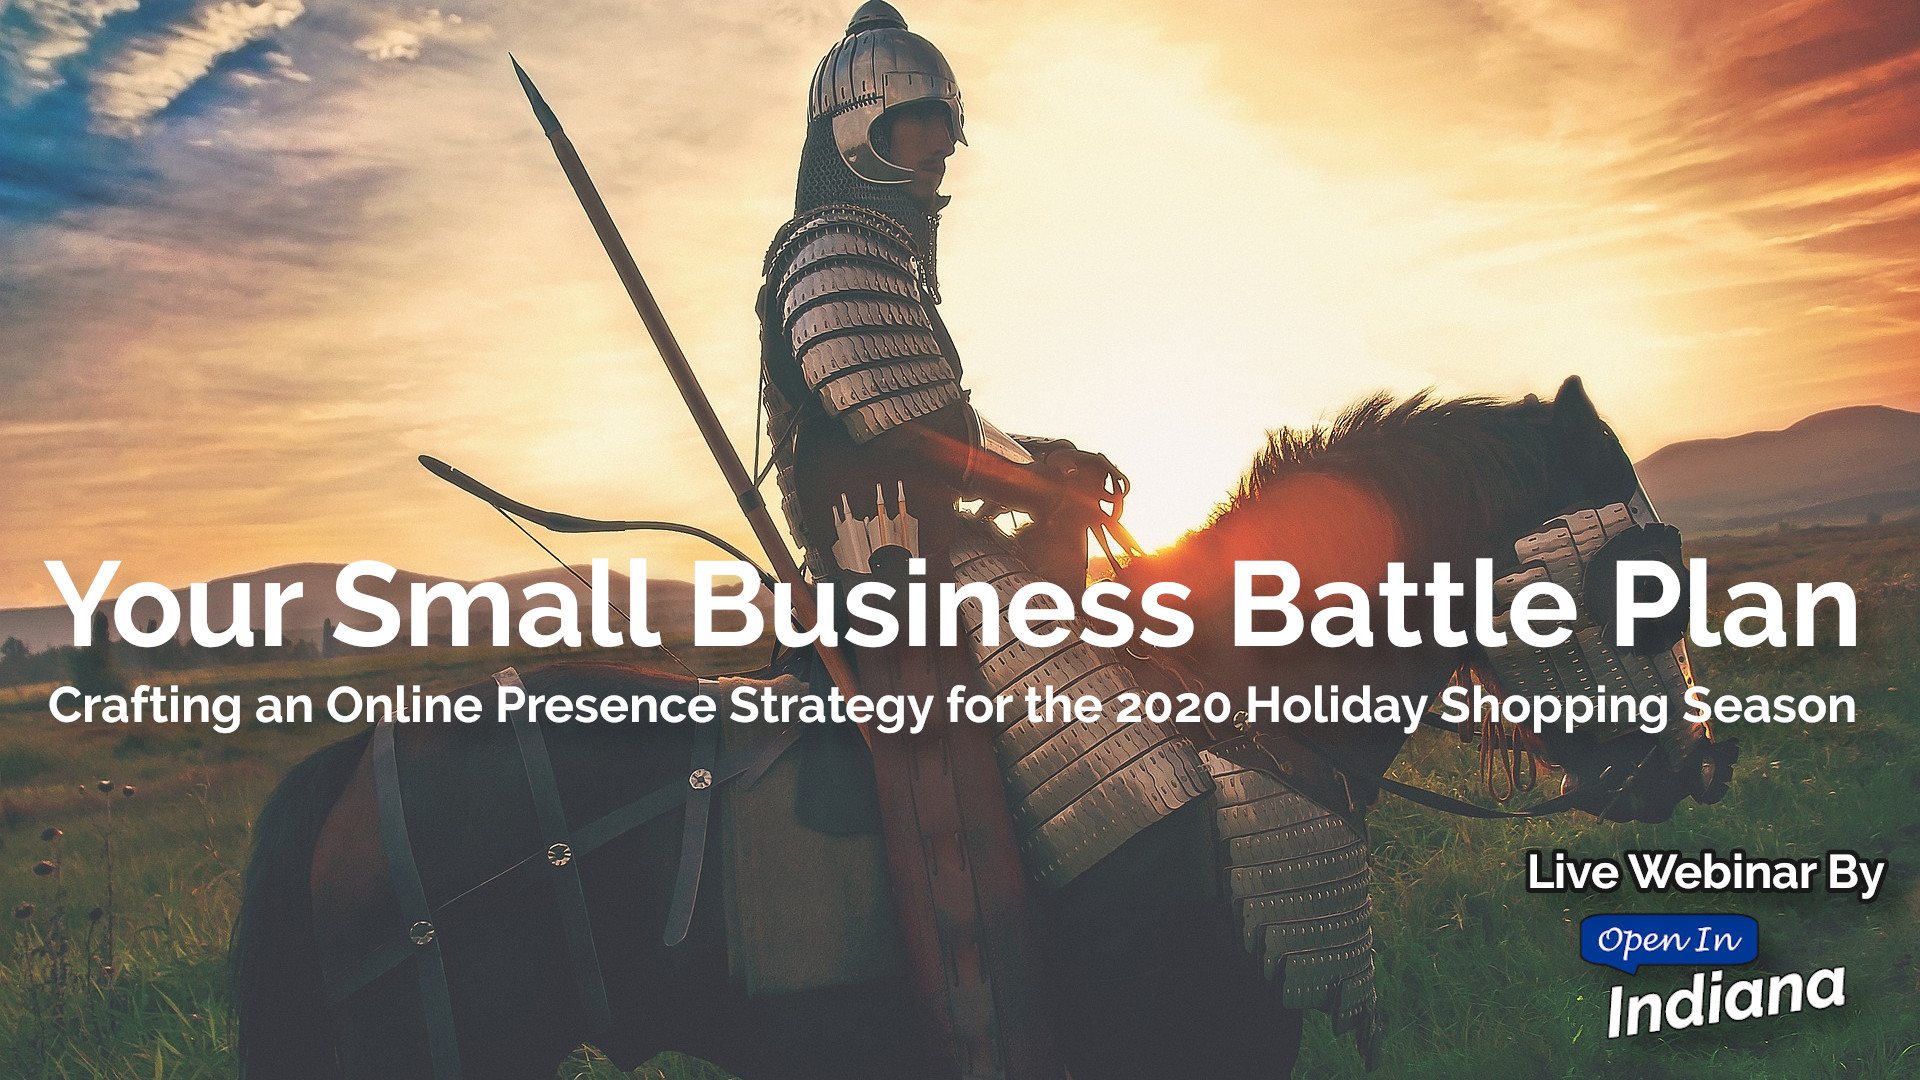 Your Small Business Battle Plan